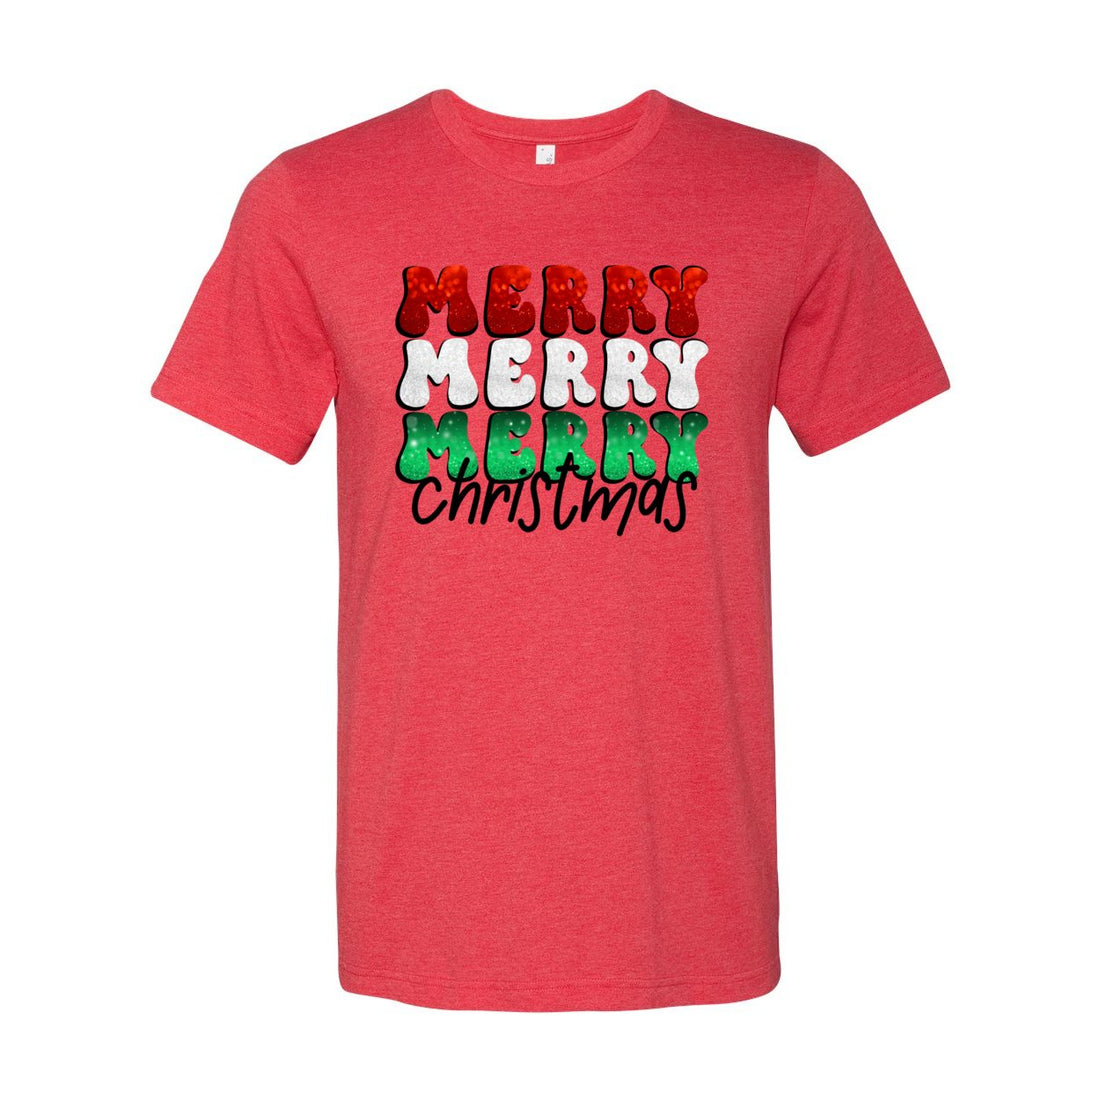 Merry Repeat Christmas - T-Shirts - Positively Sassy - Merry Repeat Christmas